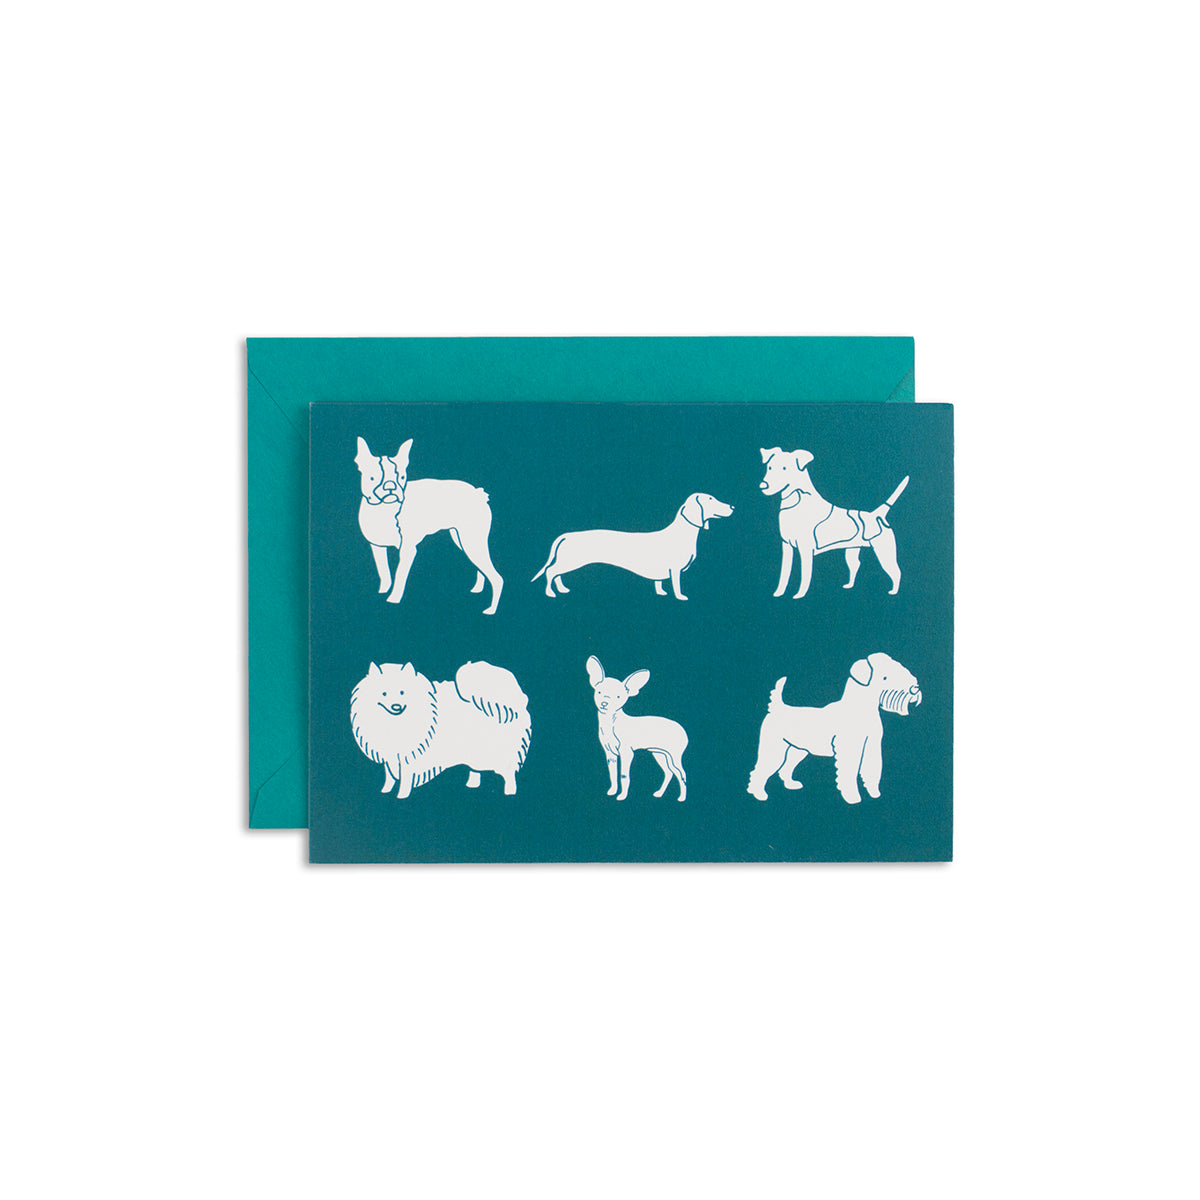 4 1/2" x 6 1/4" greeting card with 6 various dog breed illustrations in white